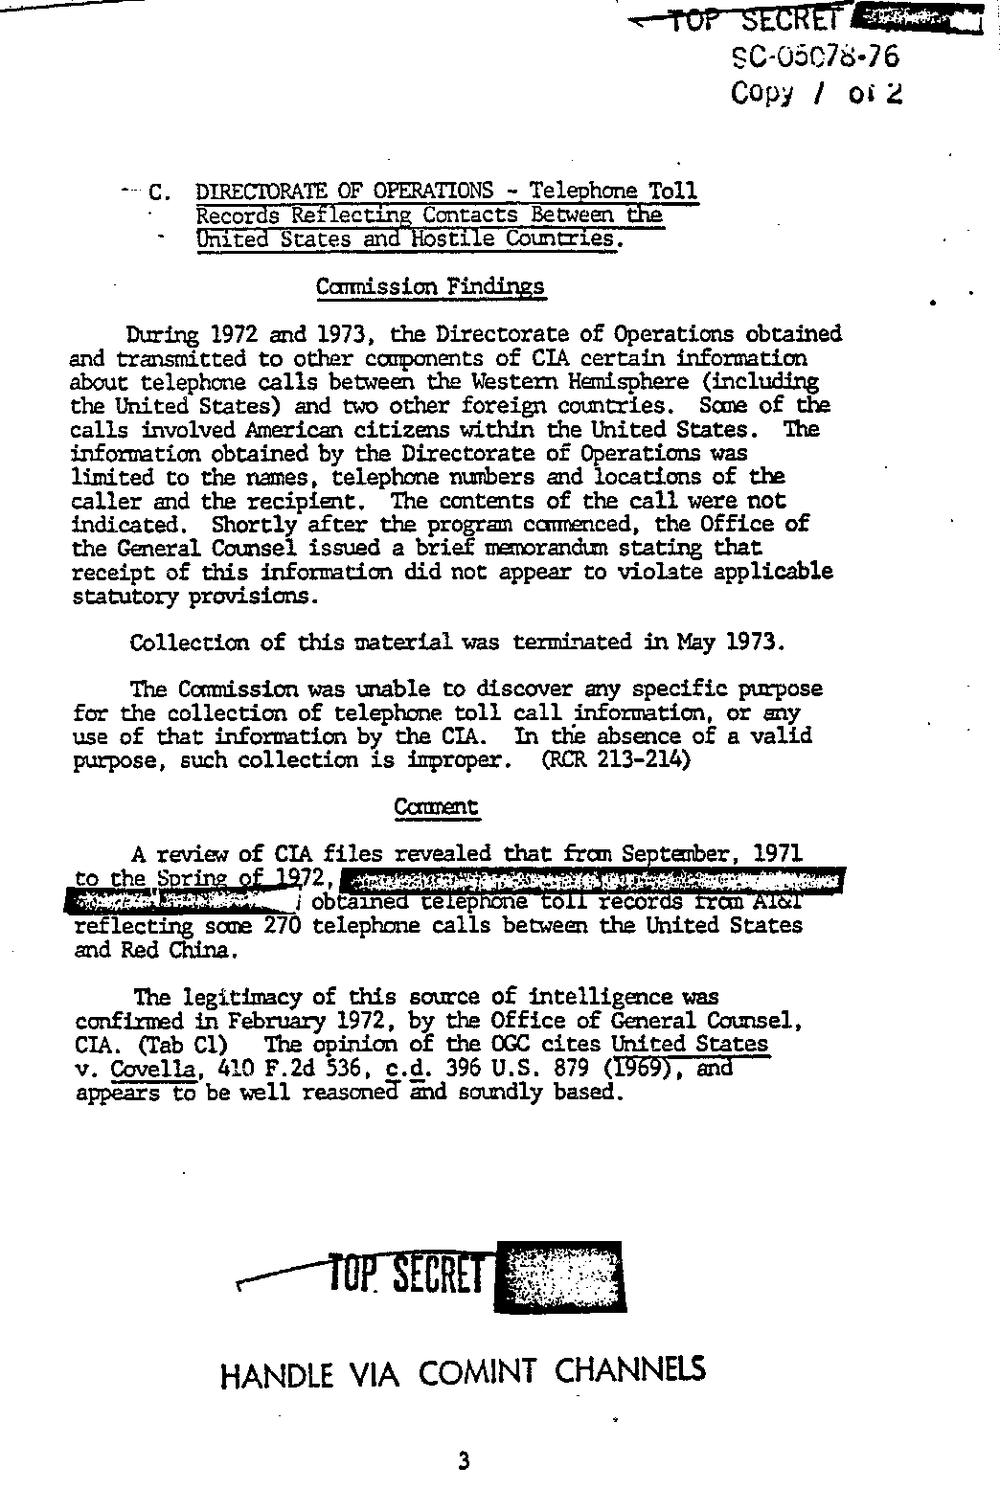 Page 11 from Report on Inquiry Into CIA Related Electronic Surveillance Activities